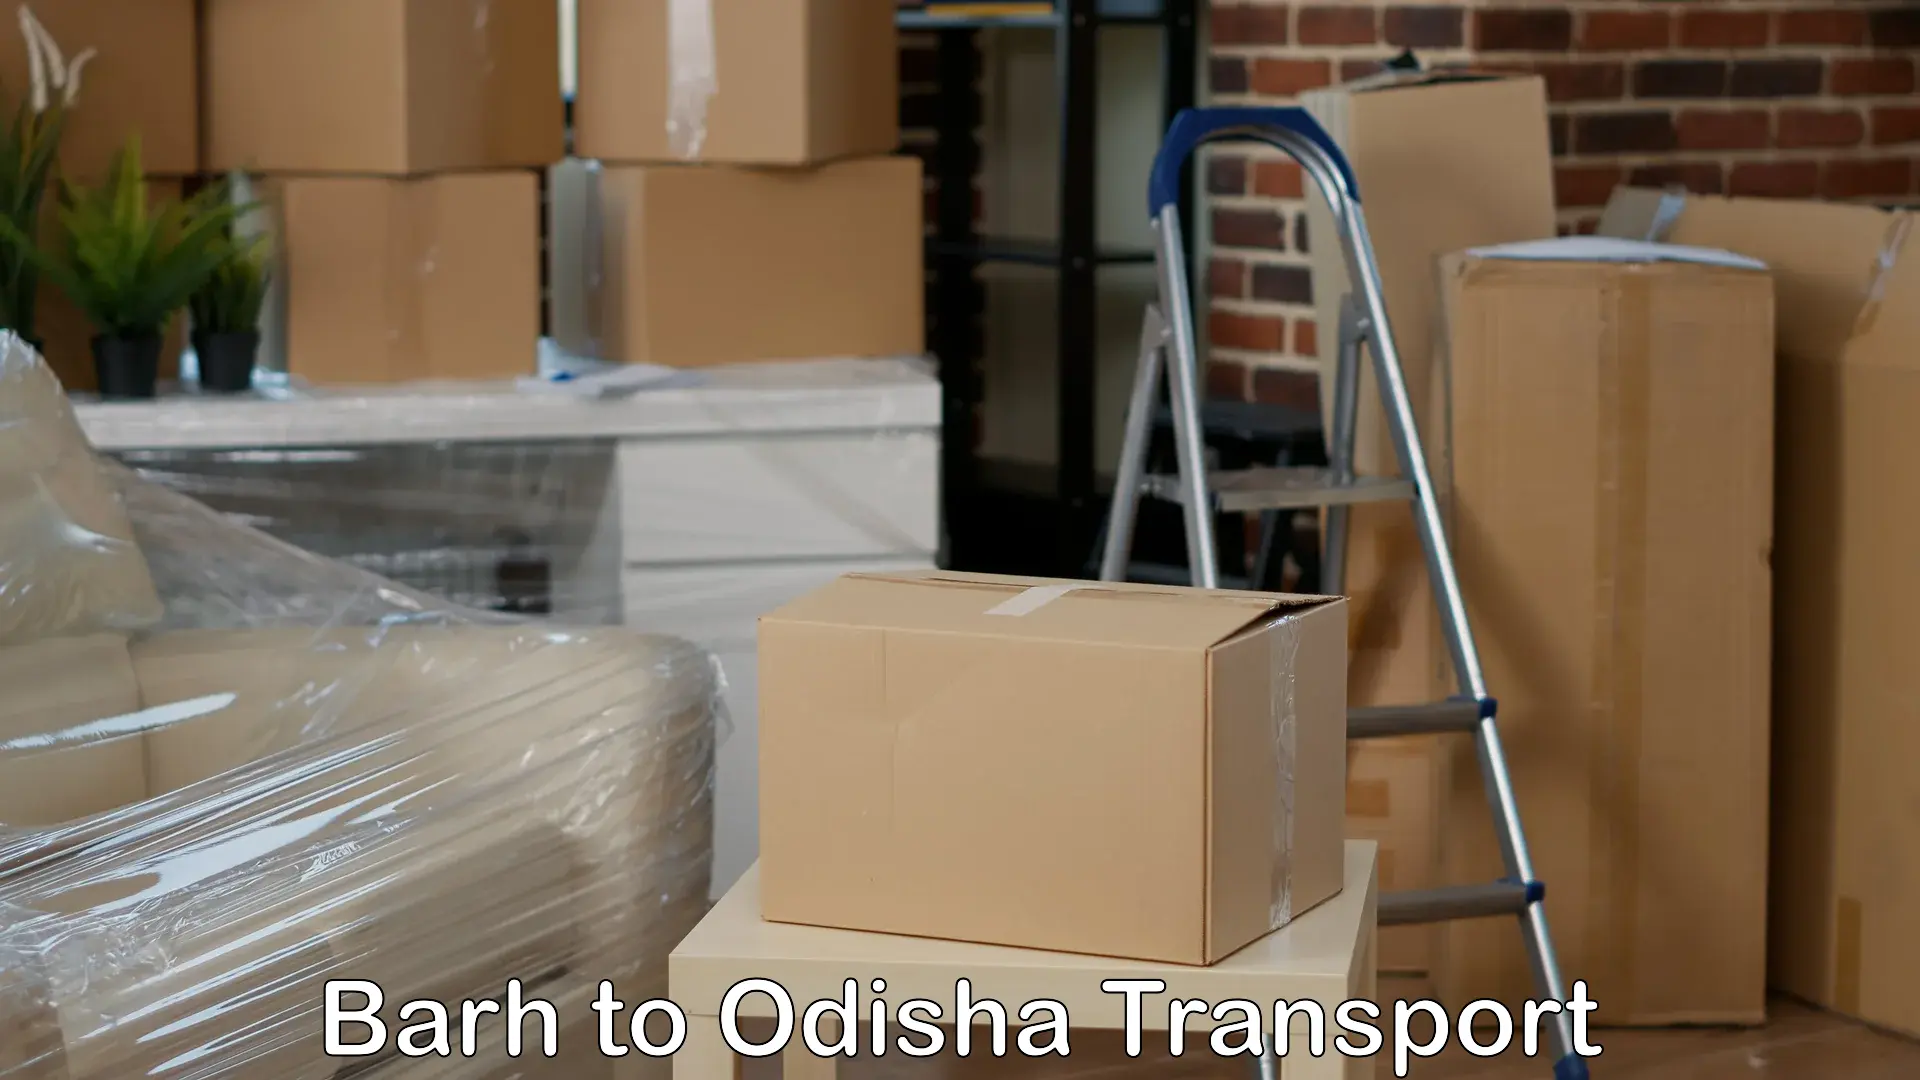 Transportation solution services in Barh to Loisingha